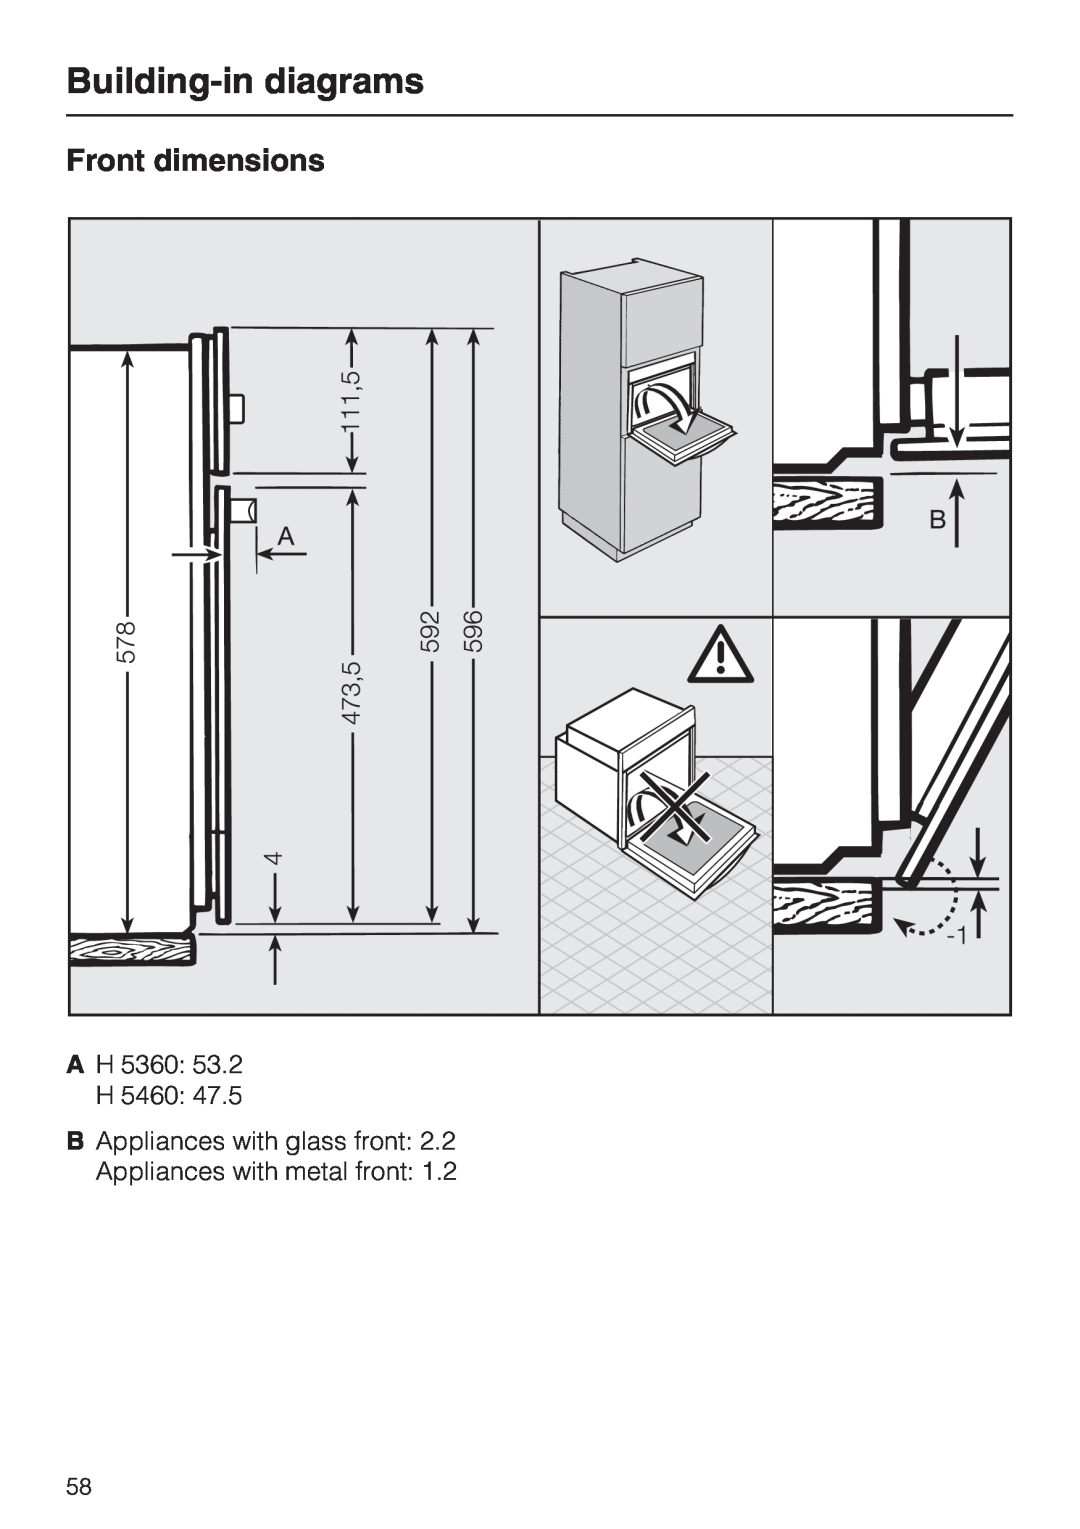 Miele H 5460-BP installation instructions Front dimensions, Building-indiagrams, 53.2, 47.5, BAppliances with glass front 